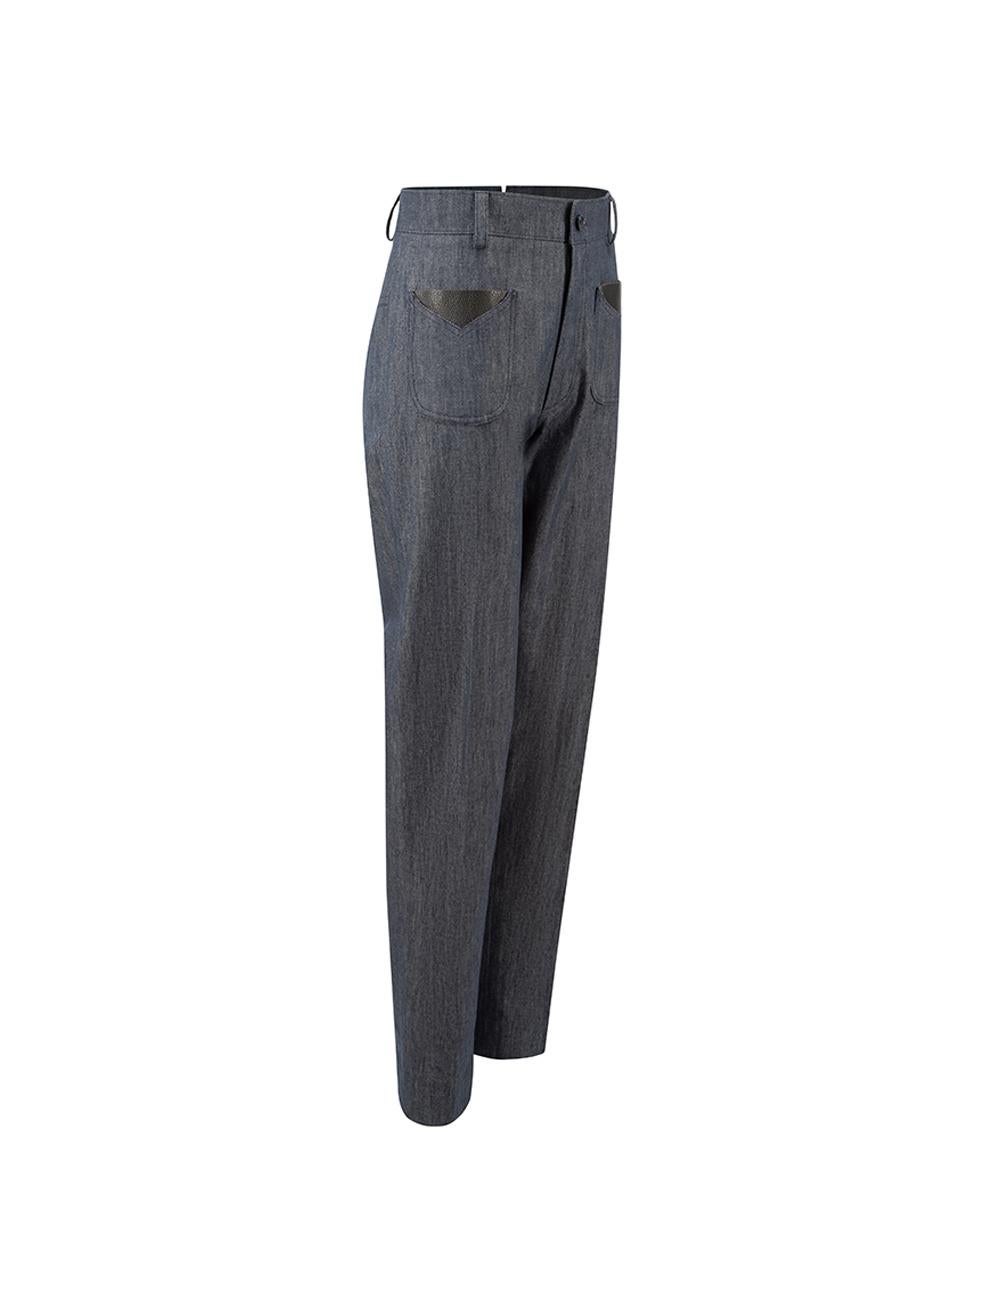 CONDITION is Very good. Hardly any visible wear to trousers is evident on this used Sanne designer sample item. Please note that this item does not have brand label.
 
 Details
  Designer sample item
 Grey
 Denim
 Straight leg trousers
 High rise
